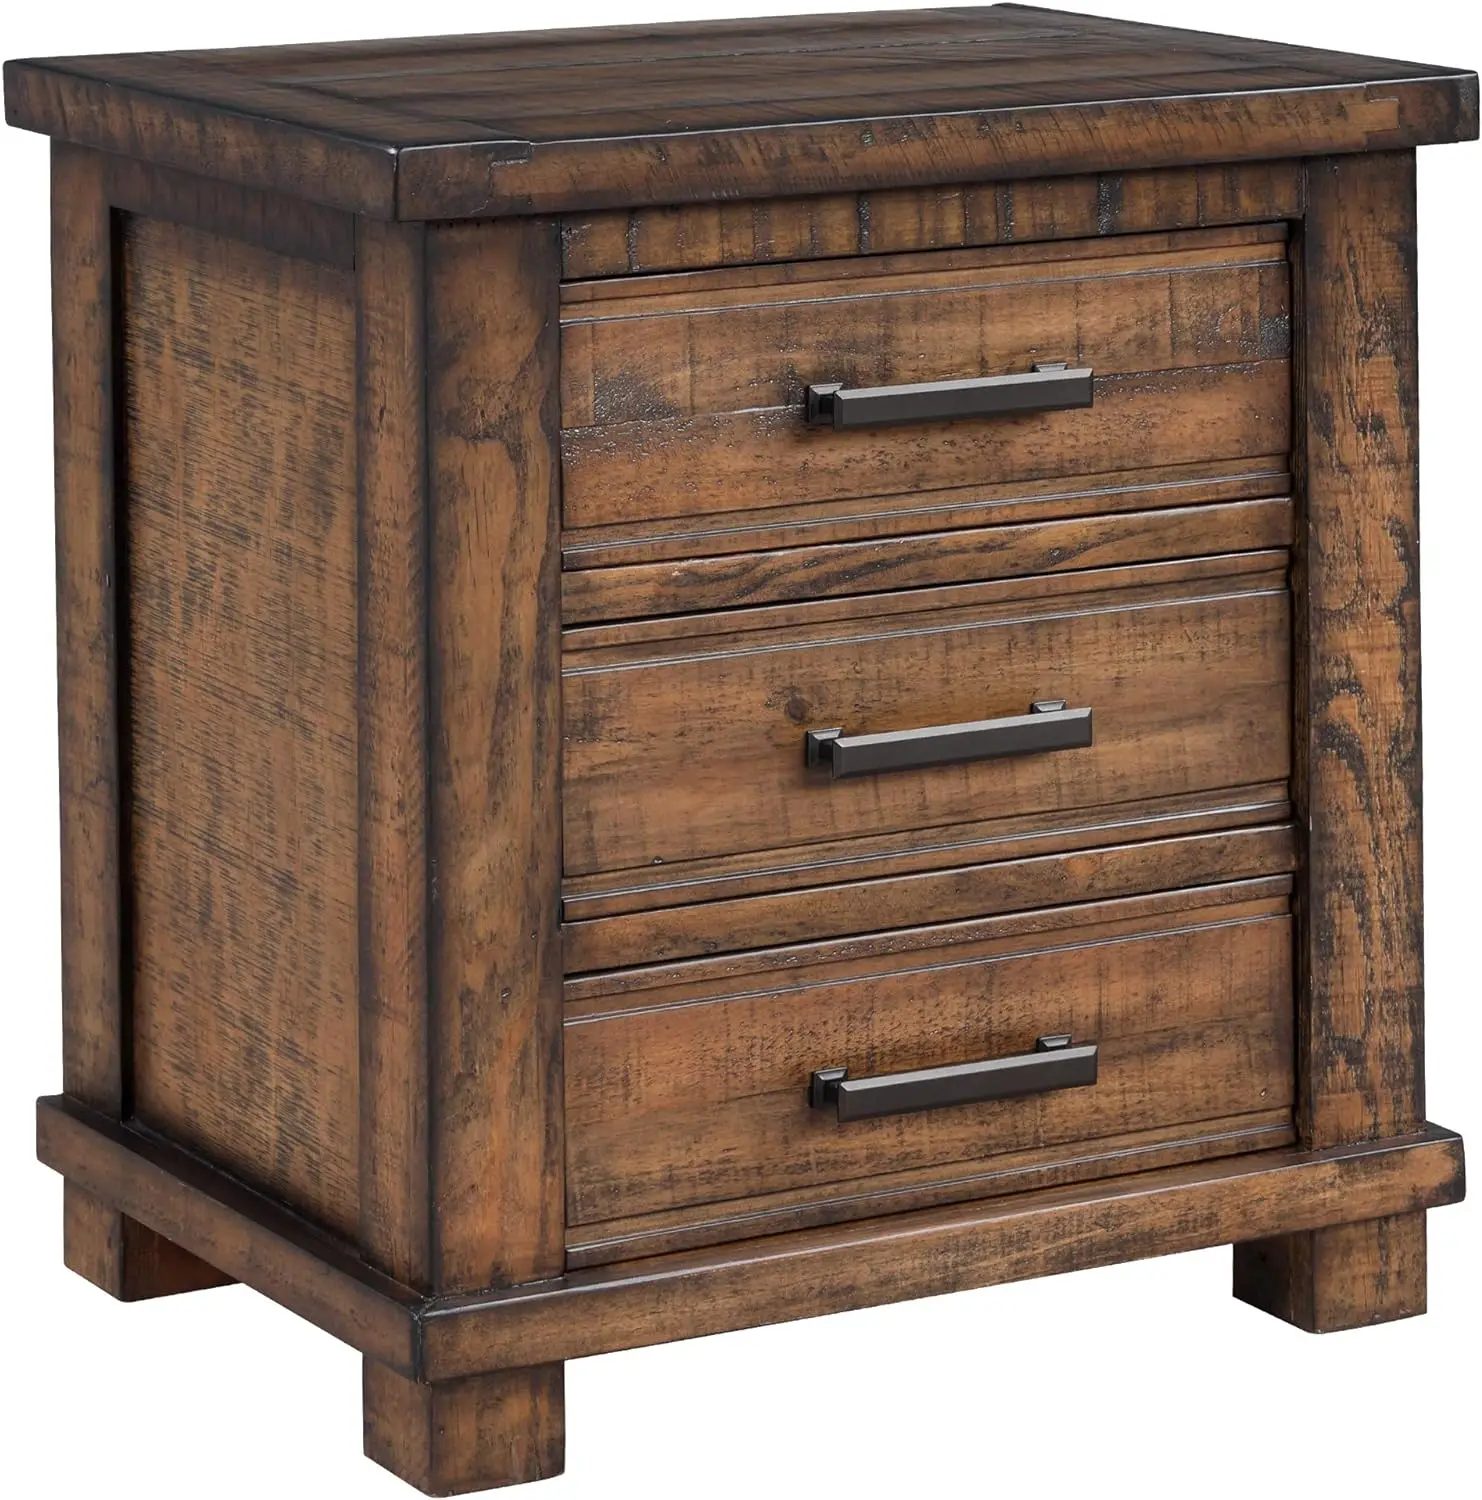 

Miscoos Rustic Farmhouse Nightstand with 3 Drawers-Reclaimed Solid Wood Bedside Table, Durable & Eco-Friendly Bedroom Furniture